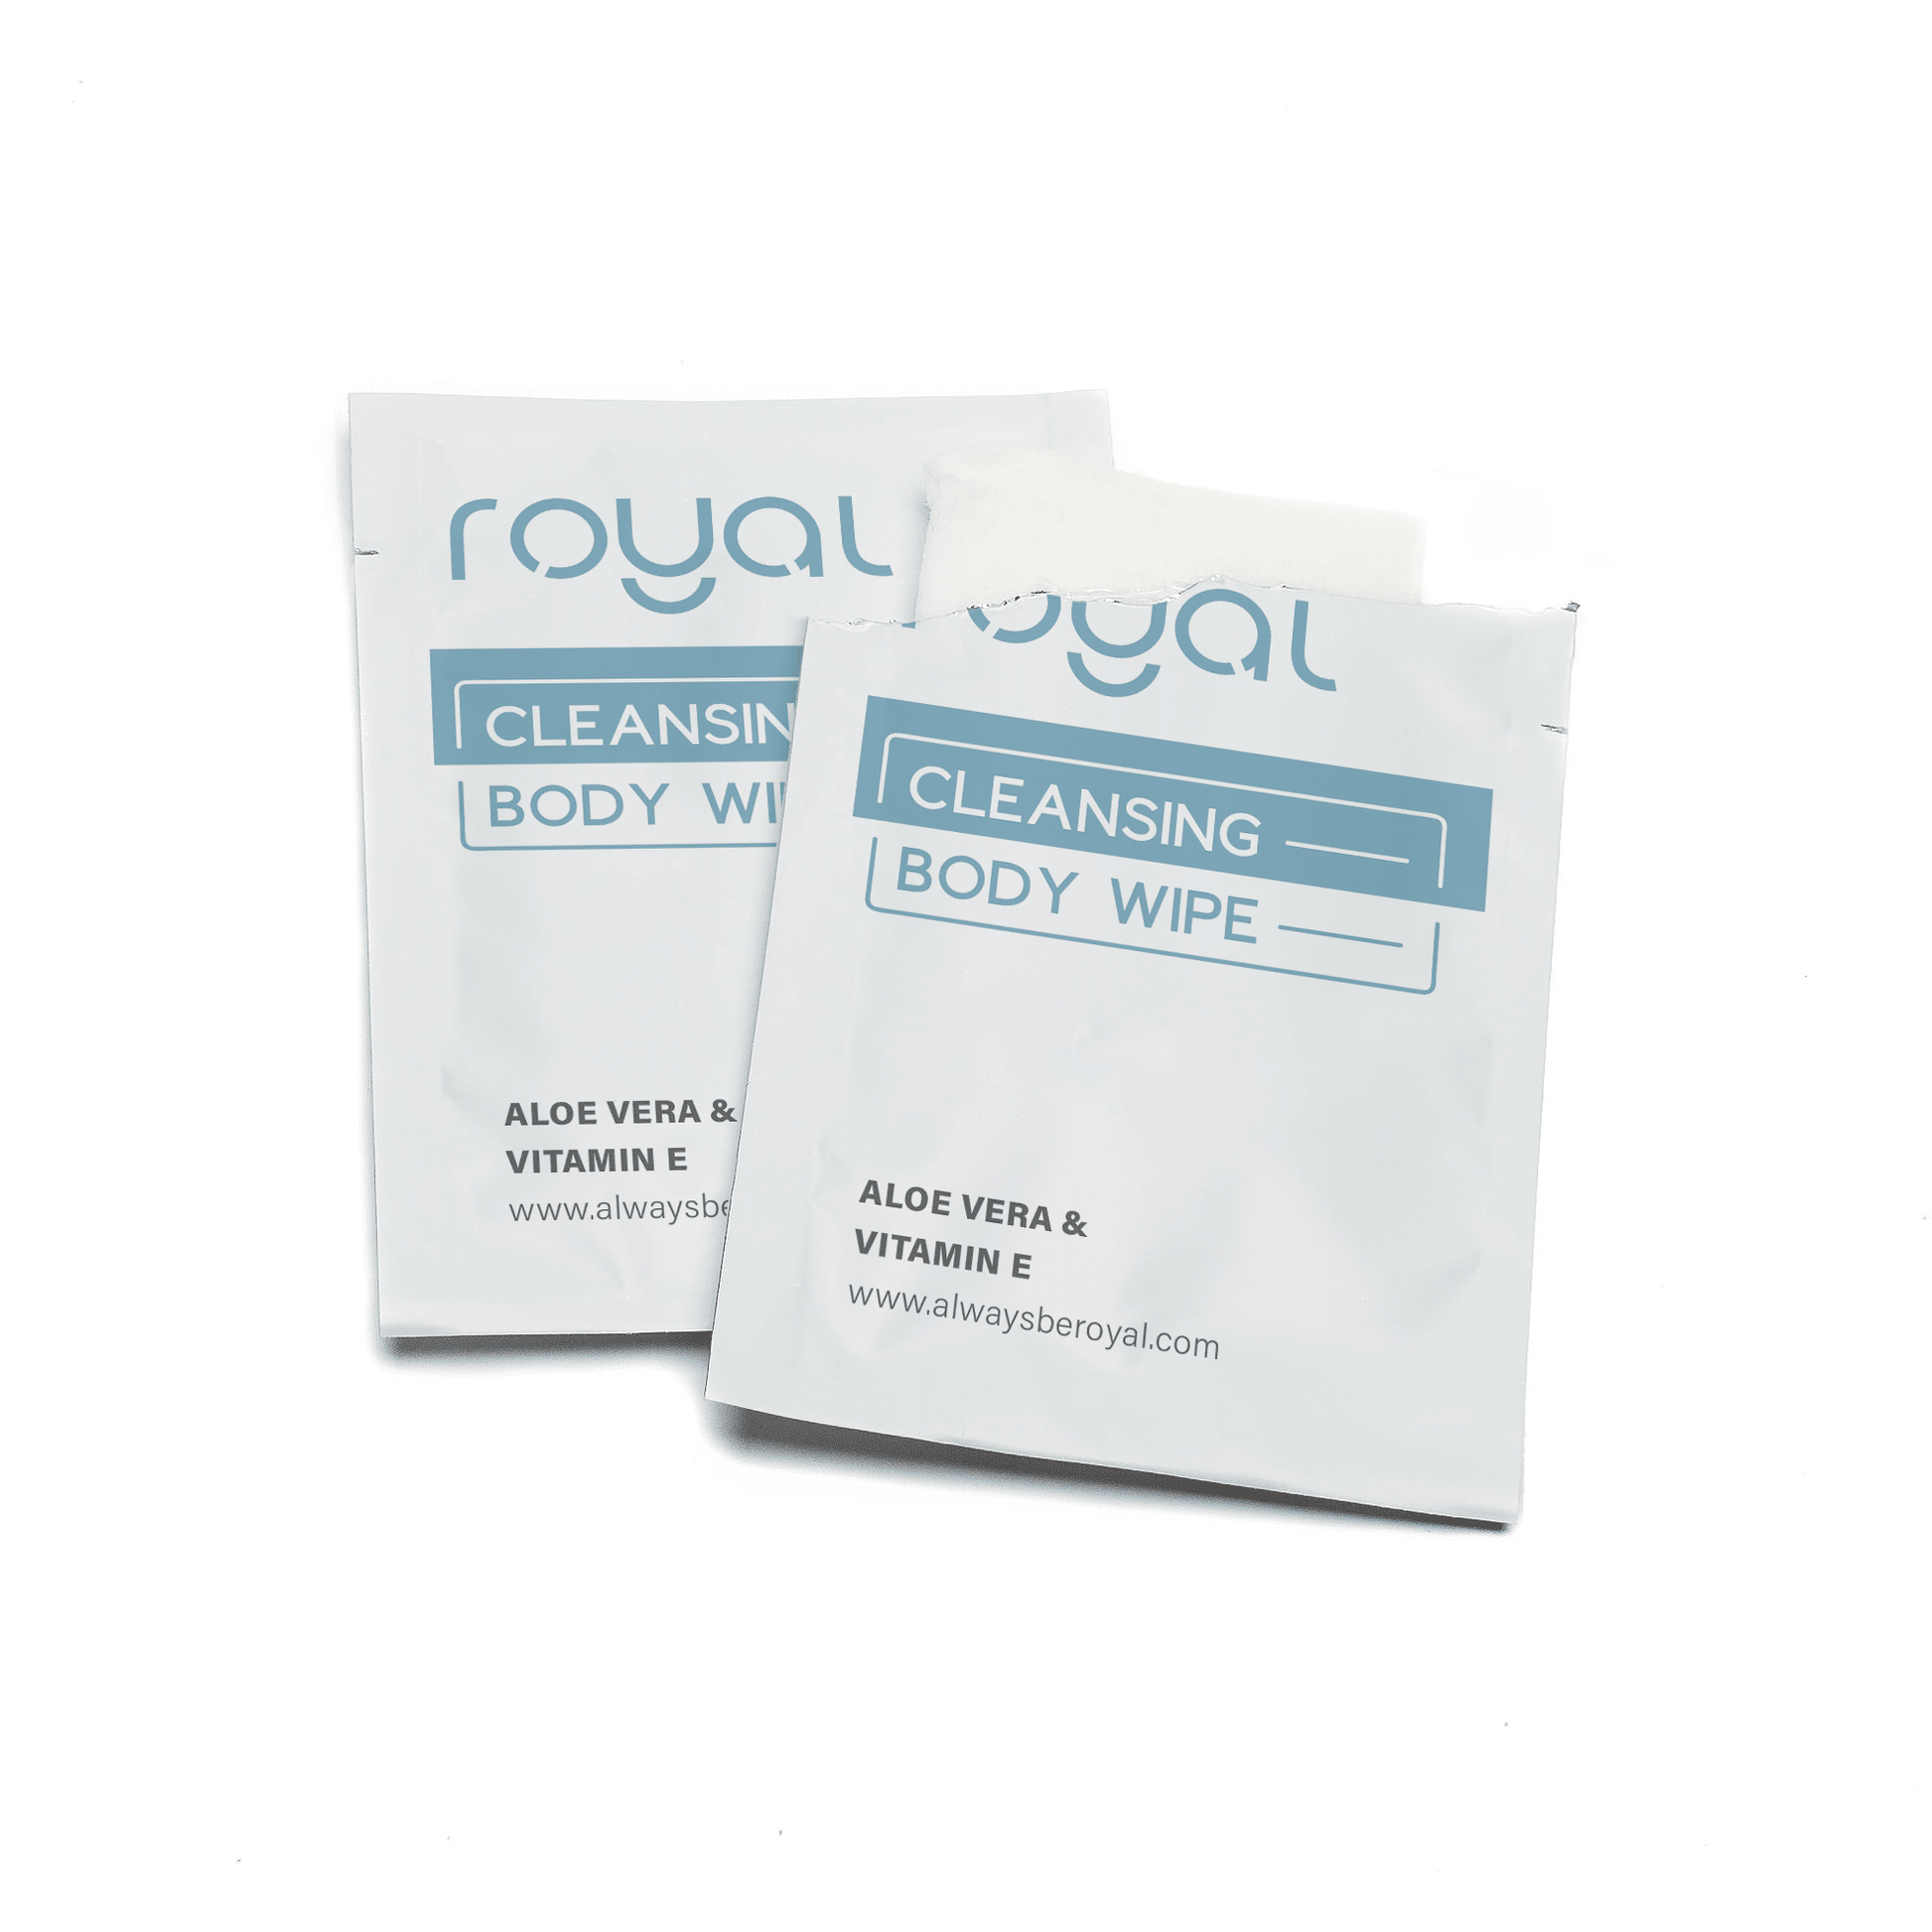 Intimate Cleansing Individually Wrapped Wipes - Royal Intimacy